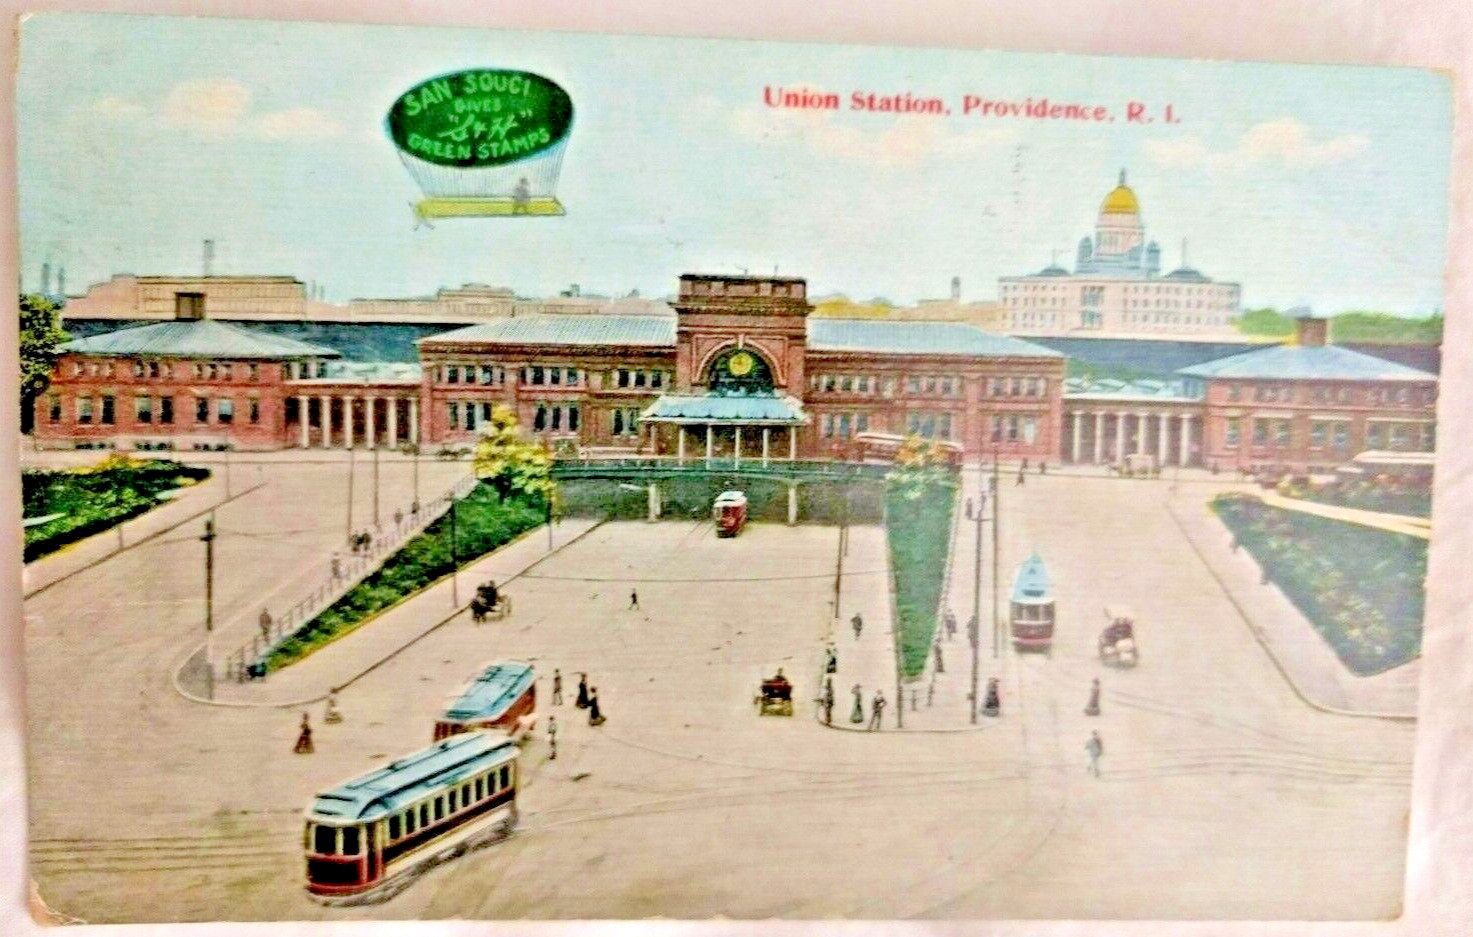 1911 Postcard: Union Station, Providence RI with S&H Green Trading Stamps